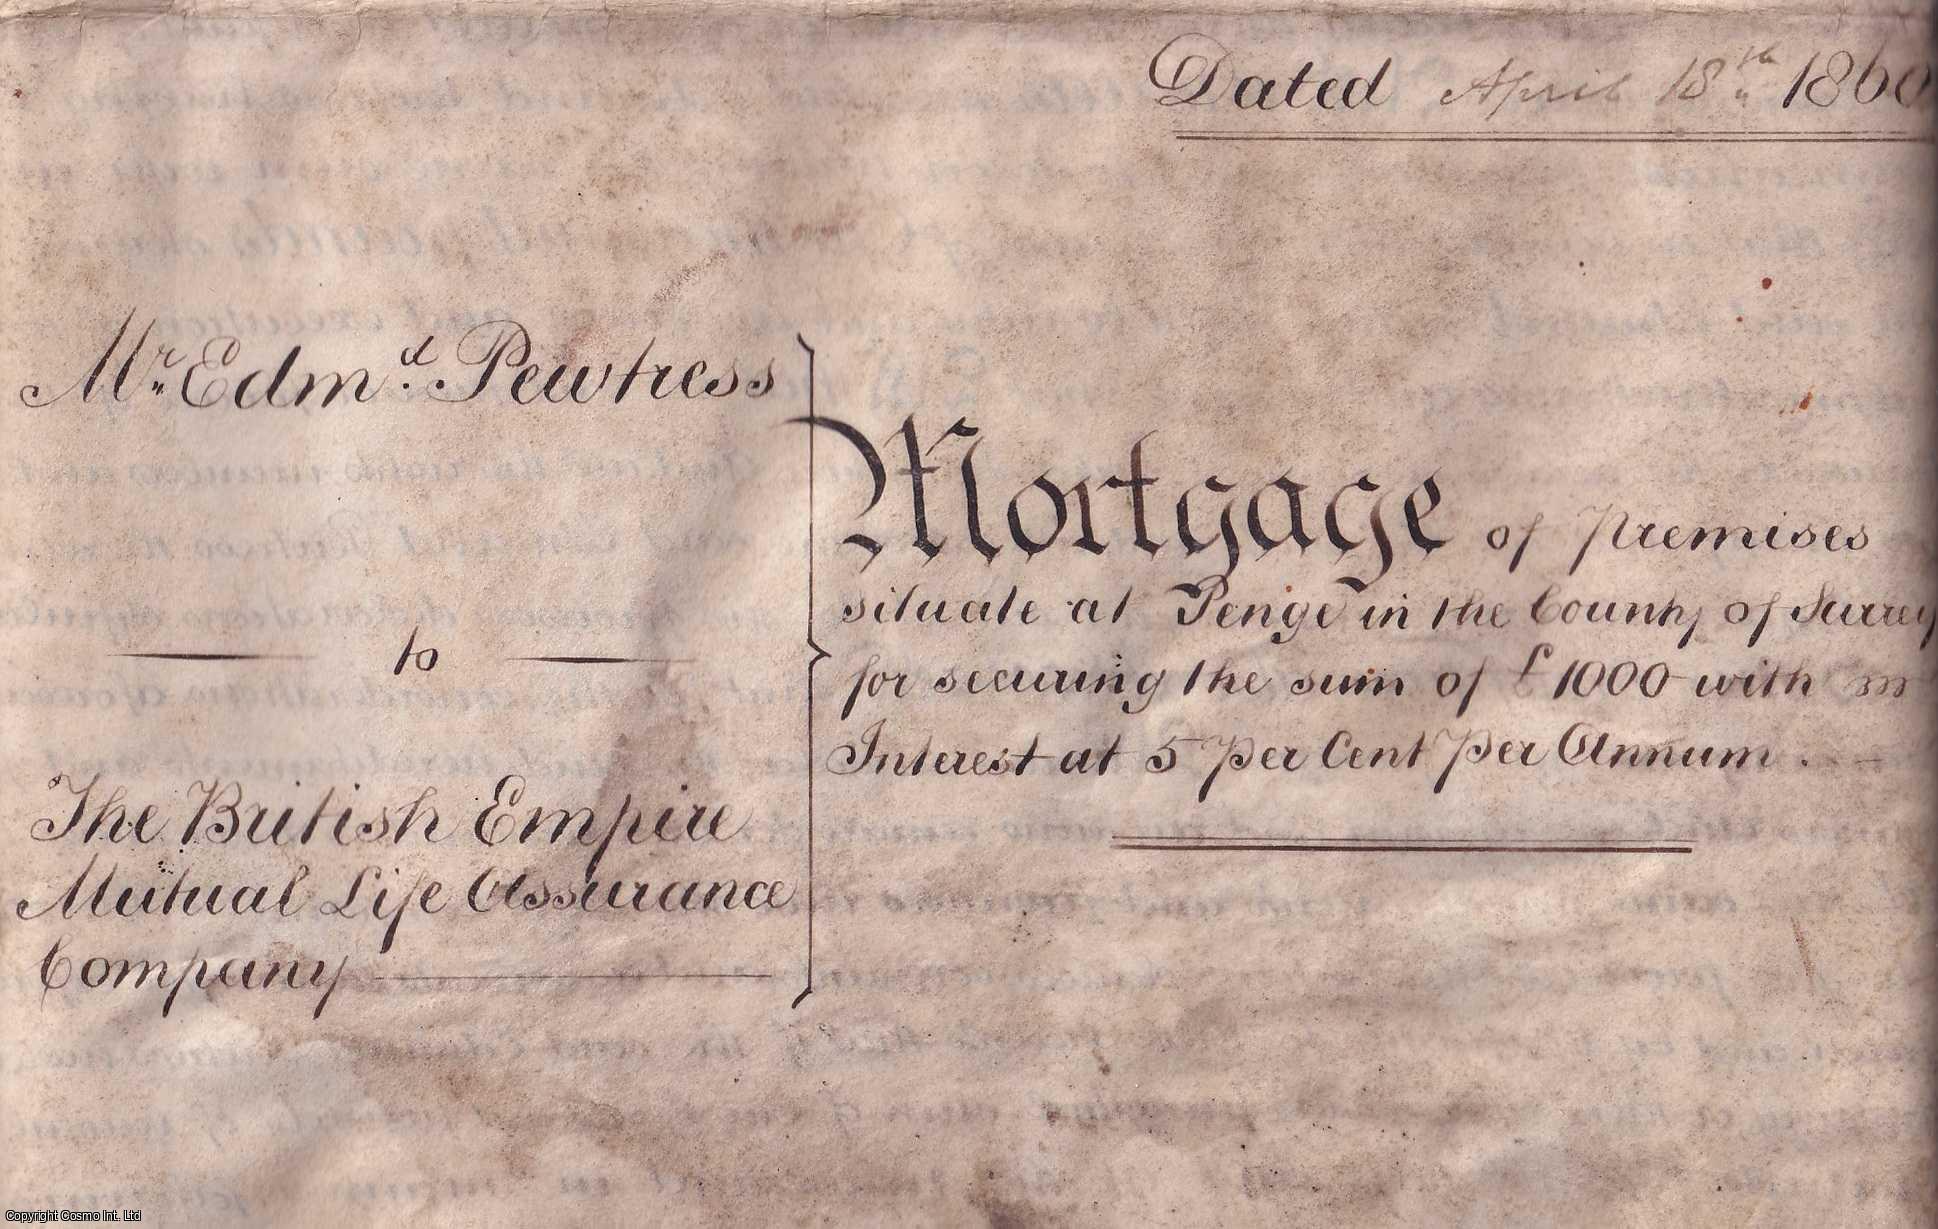 1860 Mortgage, Penge - Mortgage of Land and Hereditaments in Penge to Edmund Pewtress of Ave Maria Lane, City of London, Publisher. Three parchment sheets (27.5 x 22 inches), handwritten with signature, seal and stamps. Some staining and a 5 x 6 inch piece cut from one sheet.